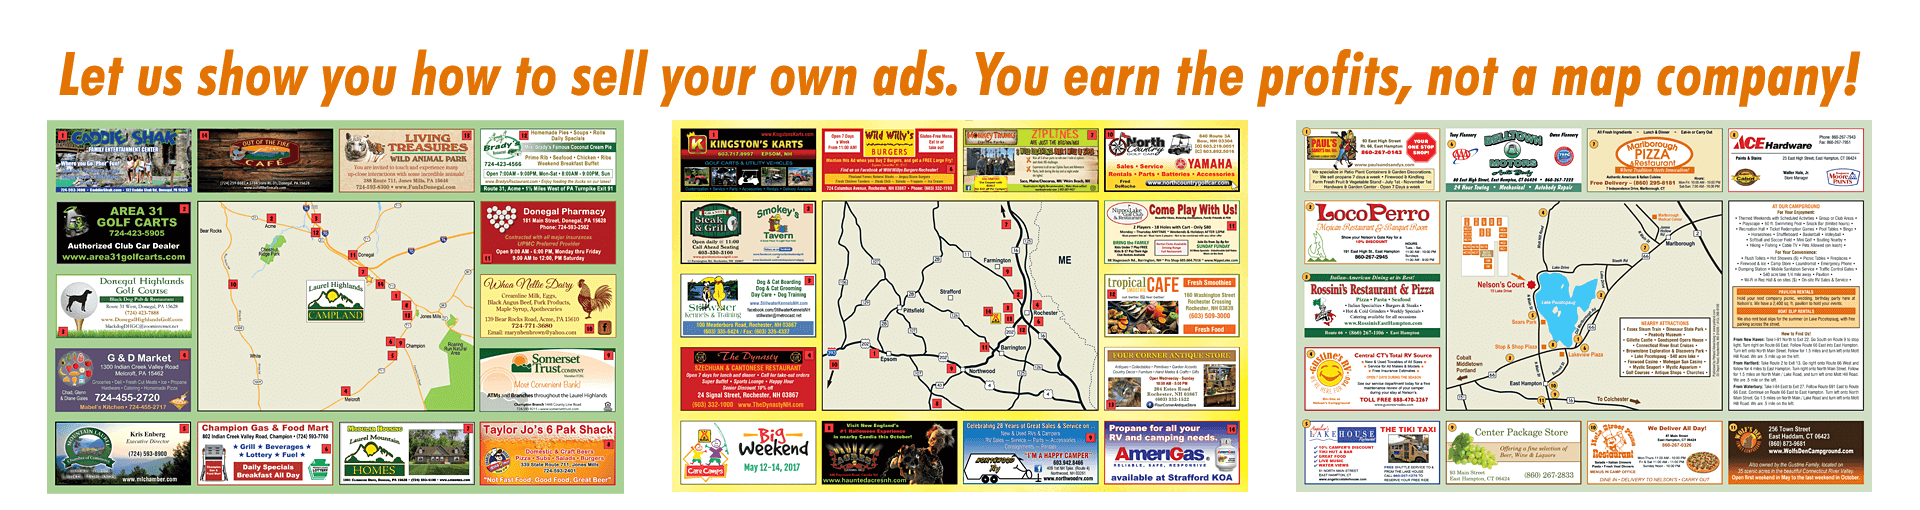 Sell your own ad site maps